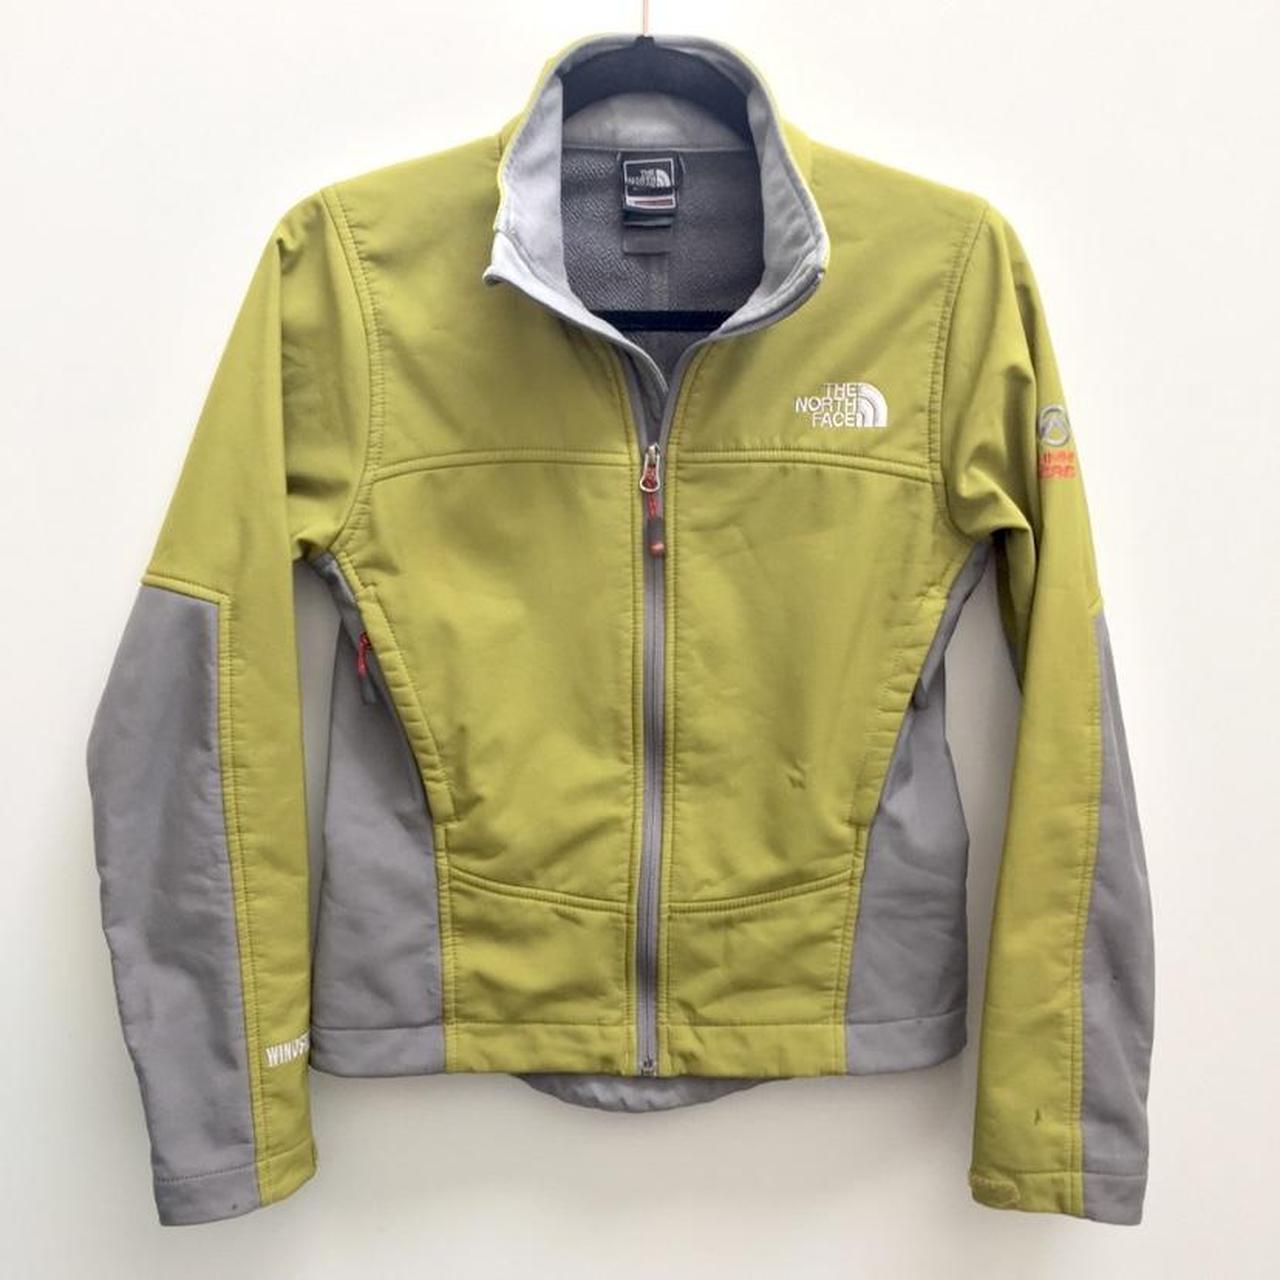 The North Face Women's Green and Grey Jacket